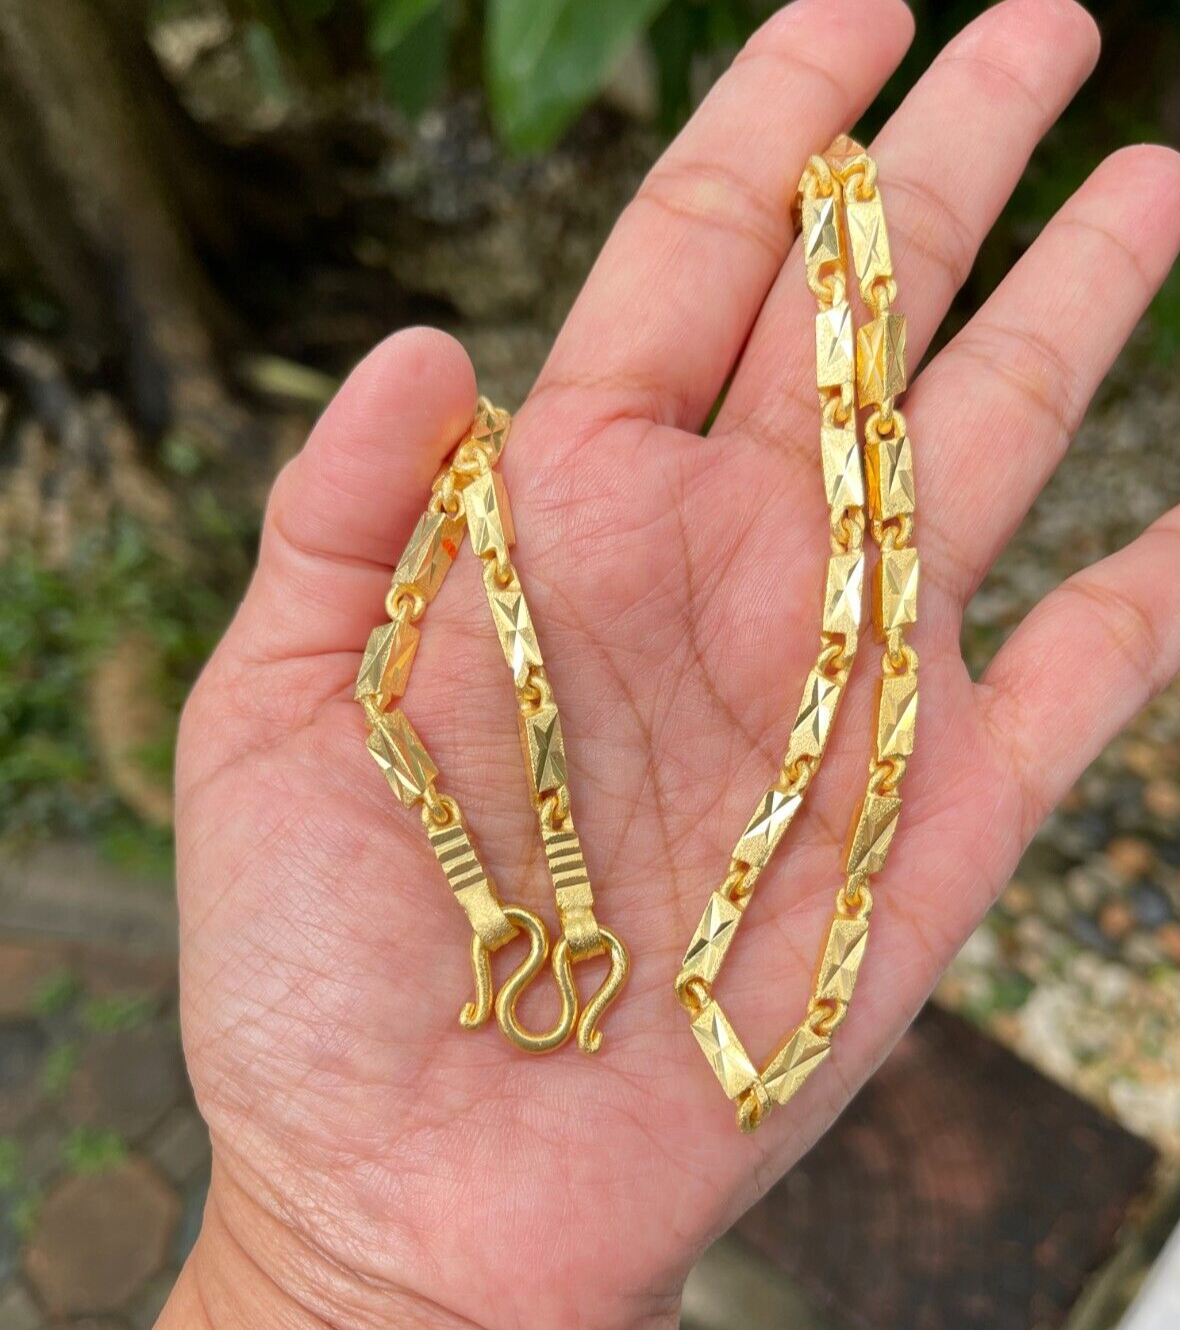 Sale 24K Thai Baht Yellow Gold GP Filled Necklace 24 inch 59 Gram